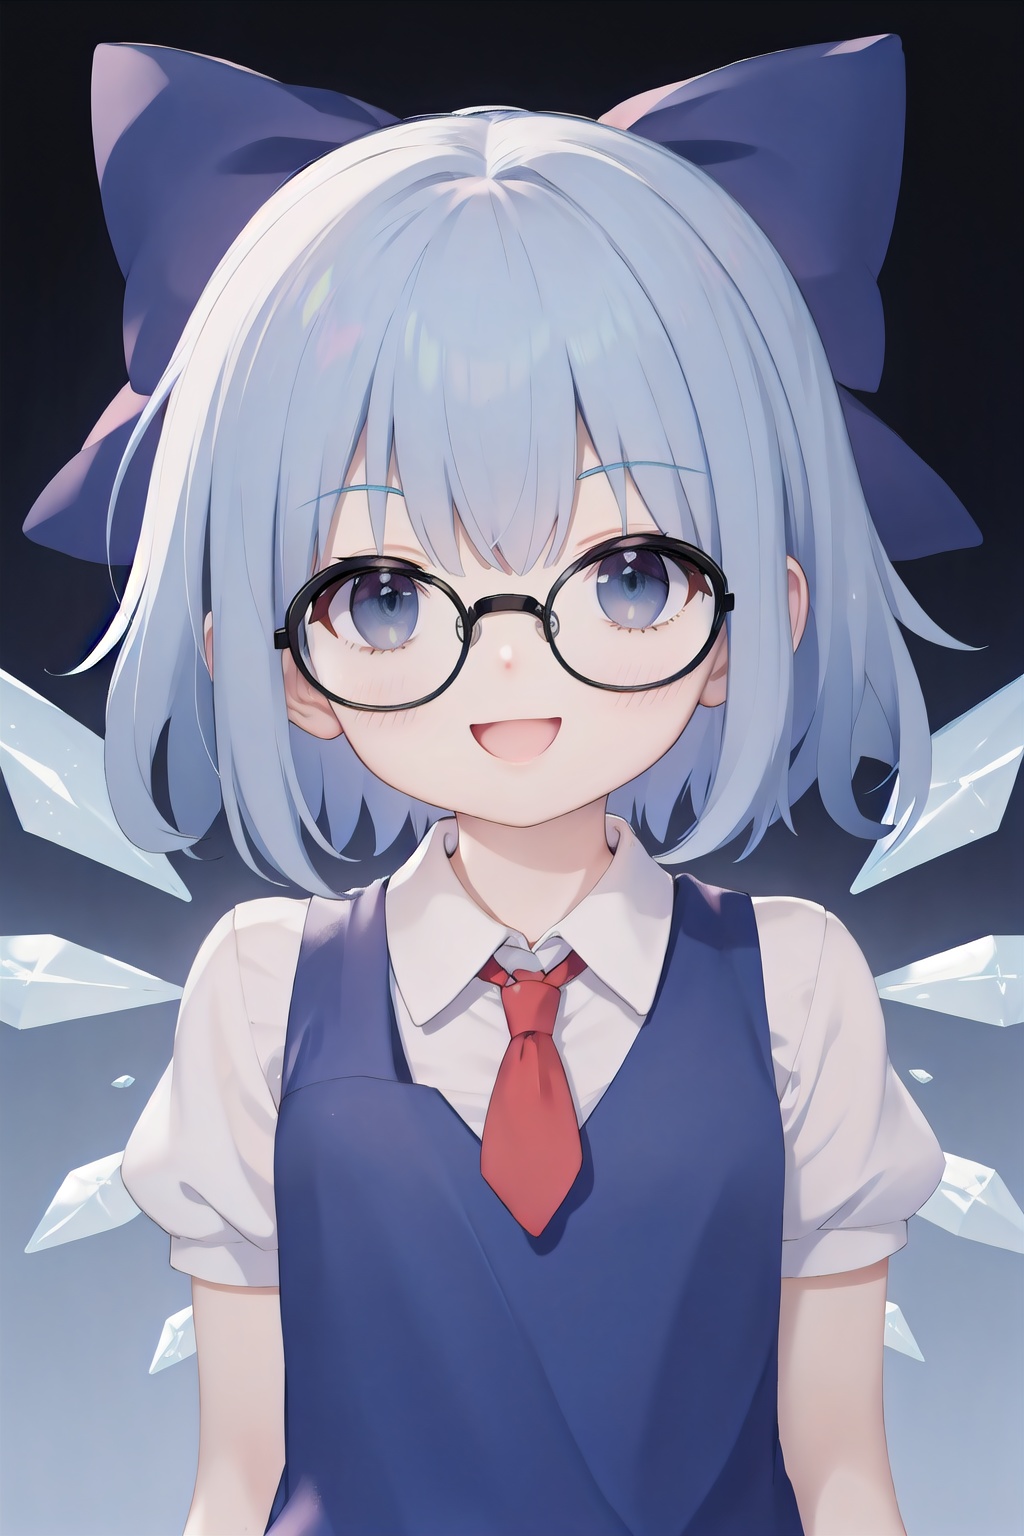 Cirno, upper body, arms at sides, Black-rimmed glasses, 😃